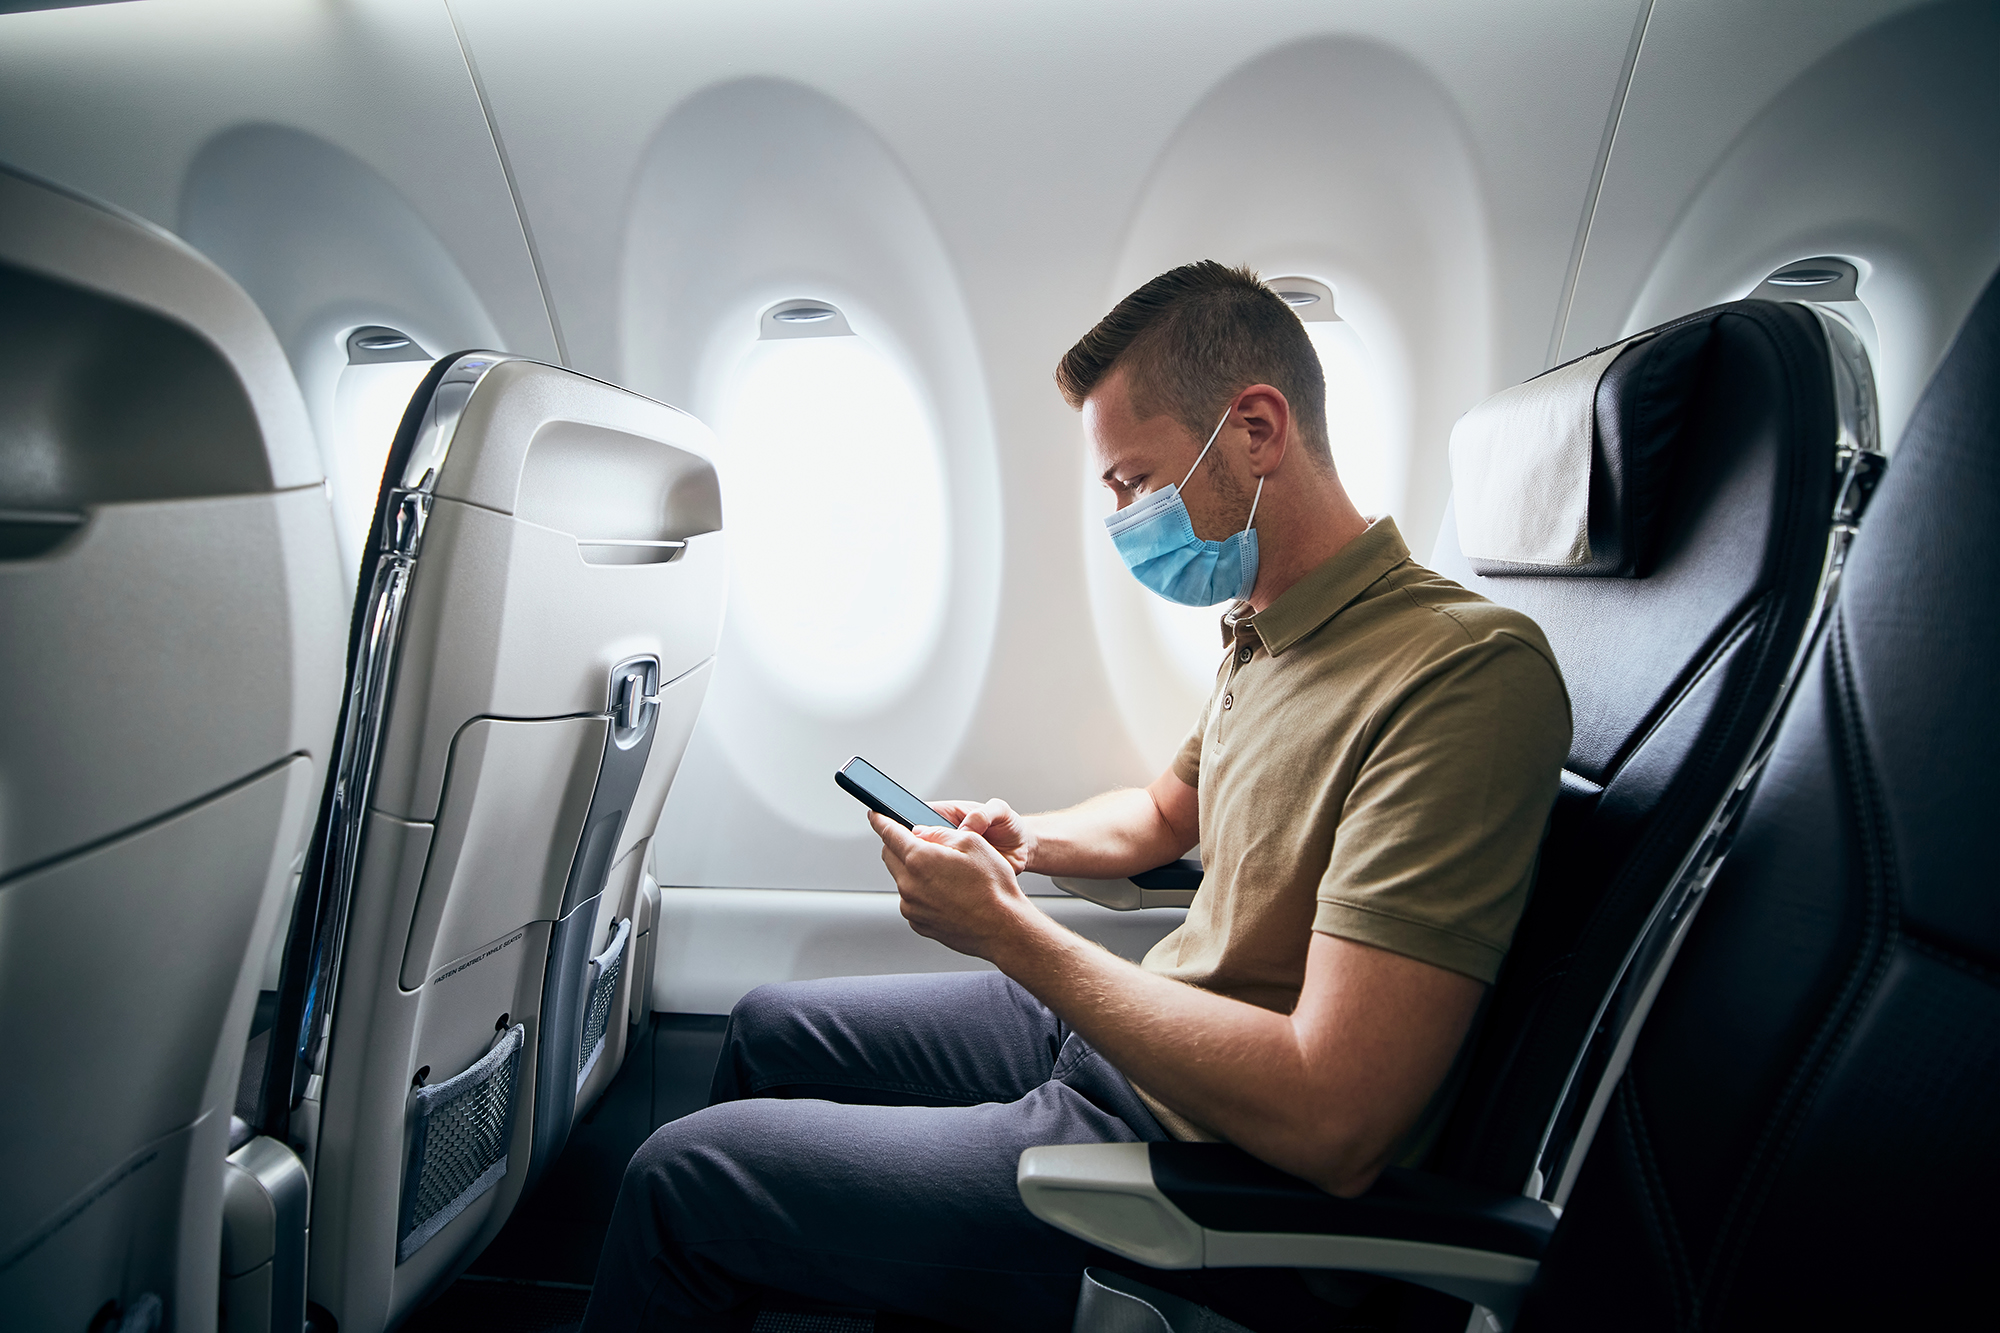 Man wearing face mask and using phone inside airplane during flight.